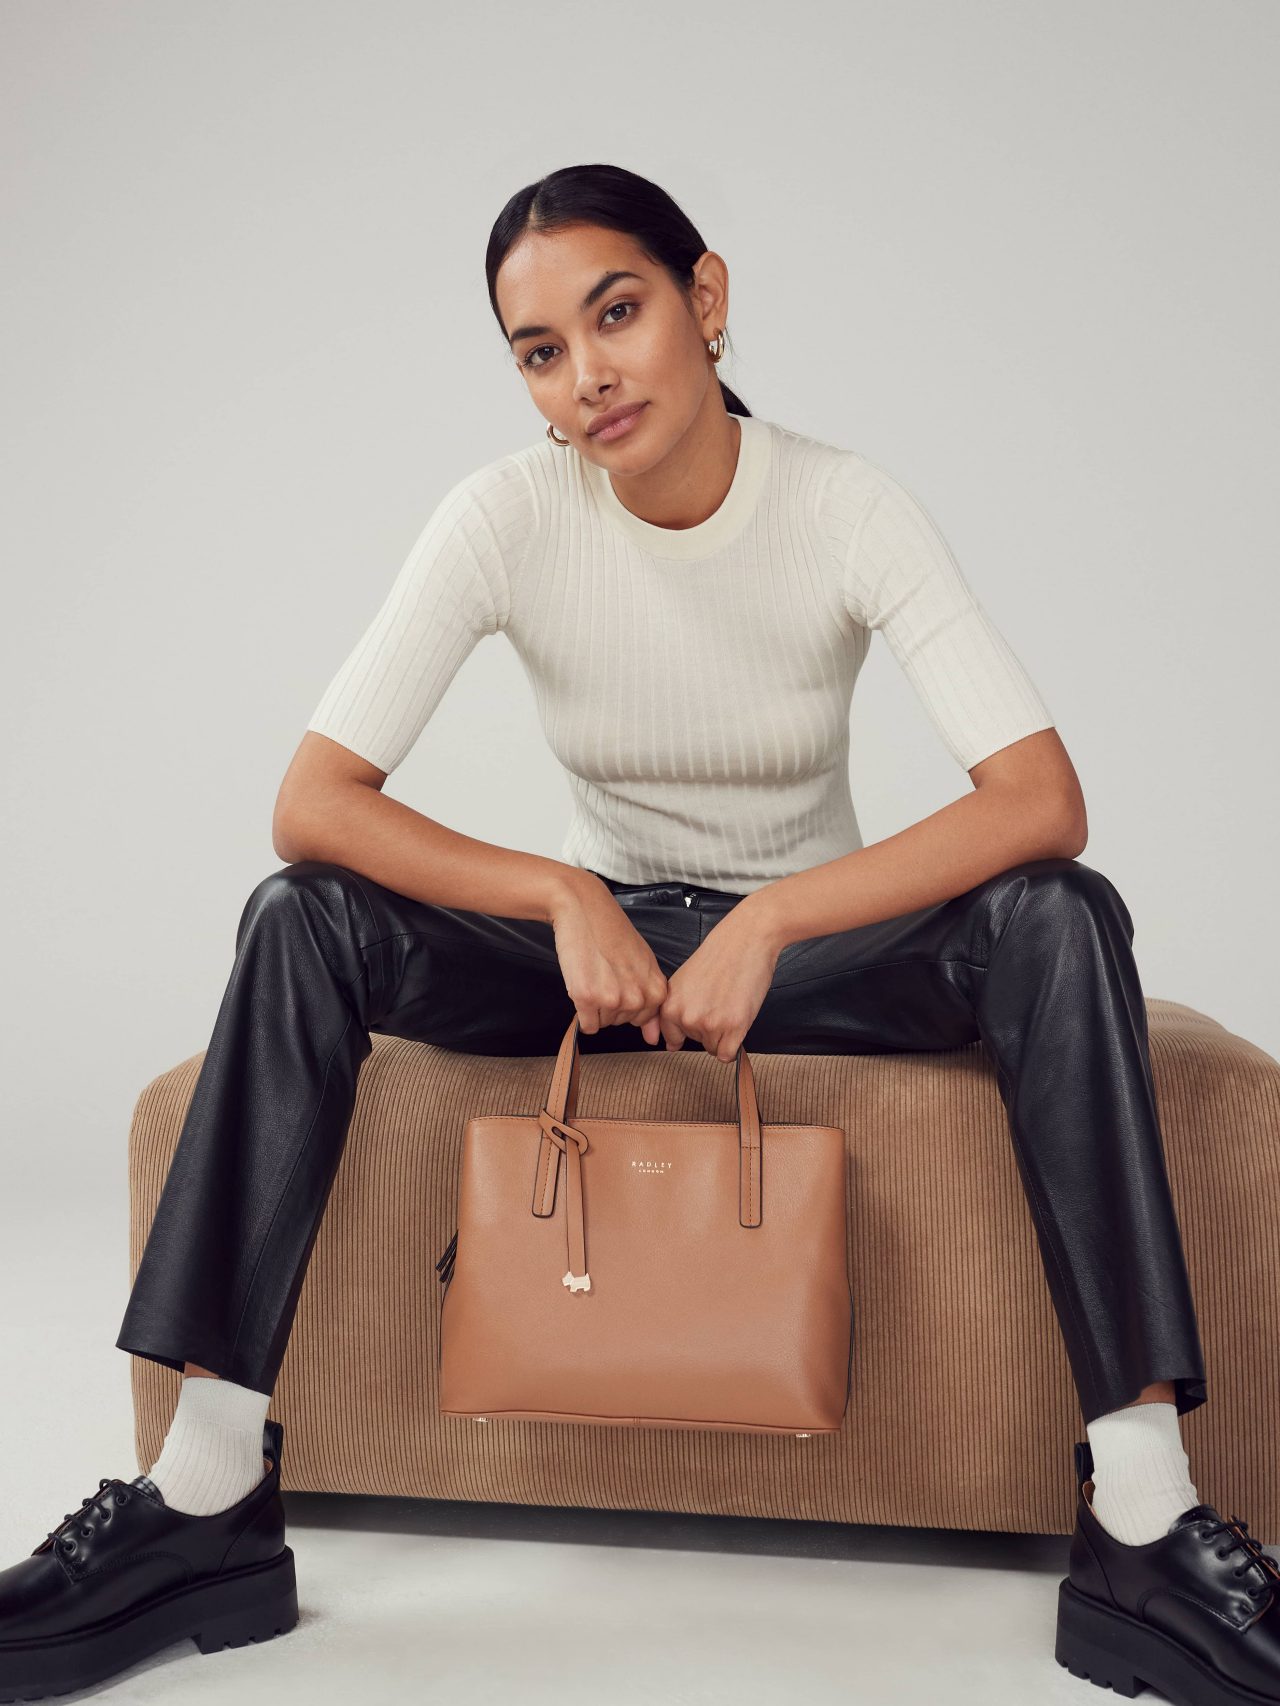 Model with two Dukes Place leather handbags